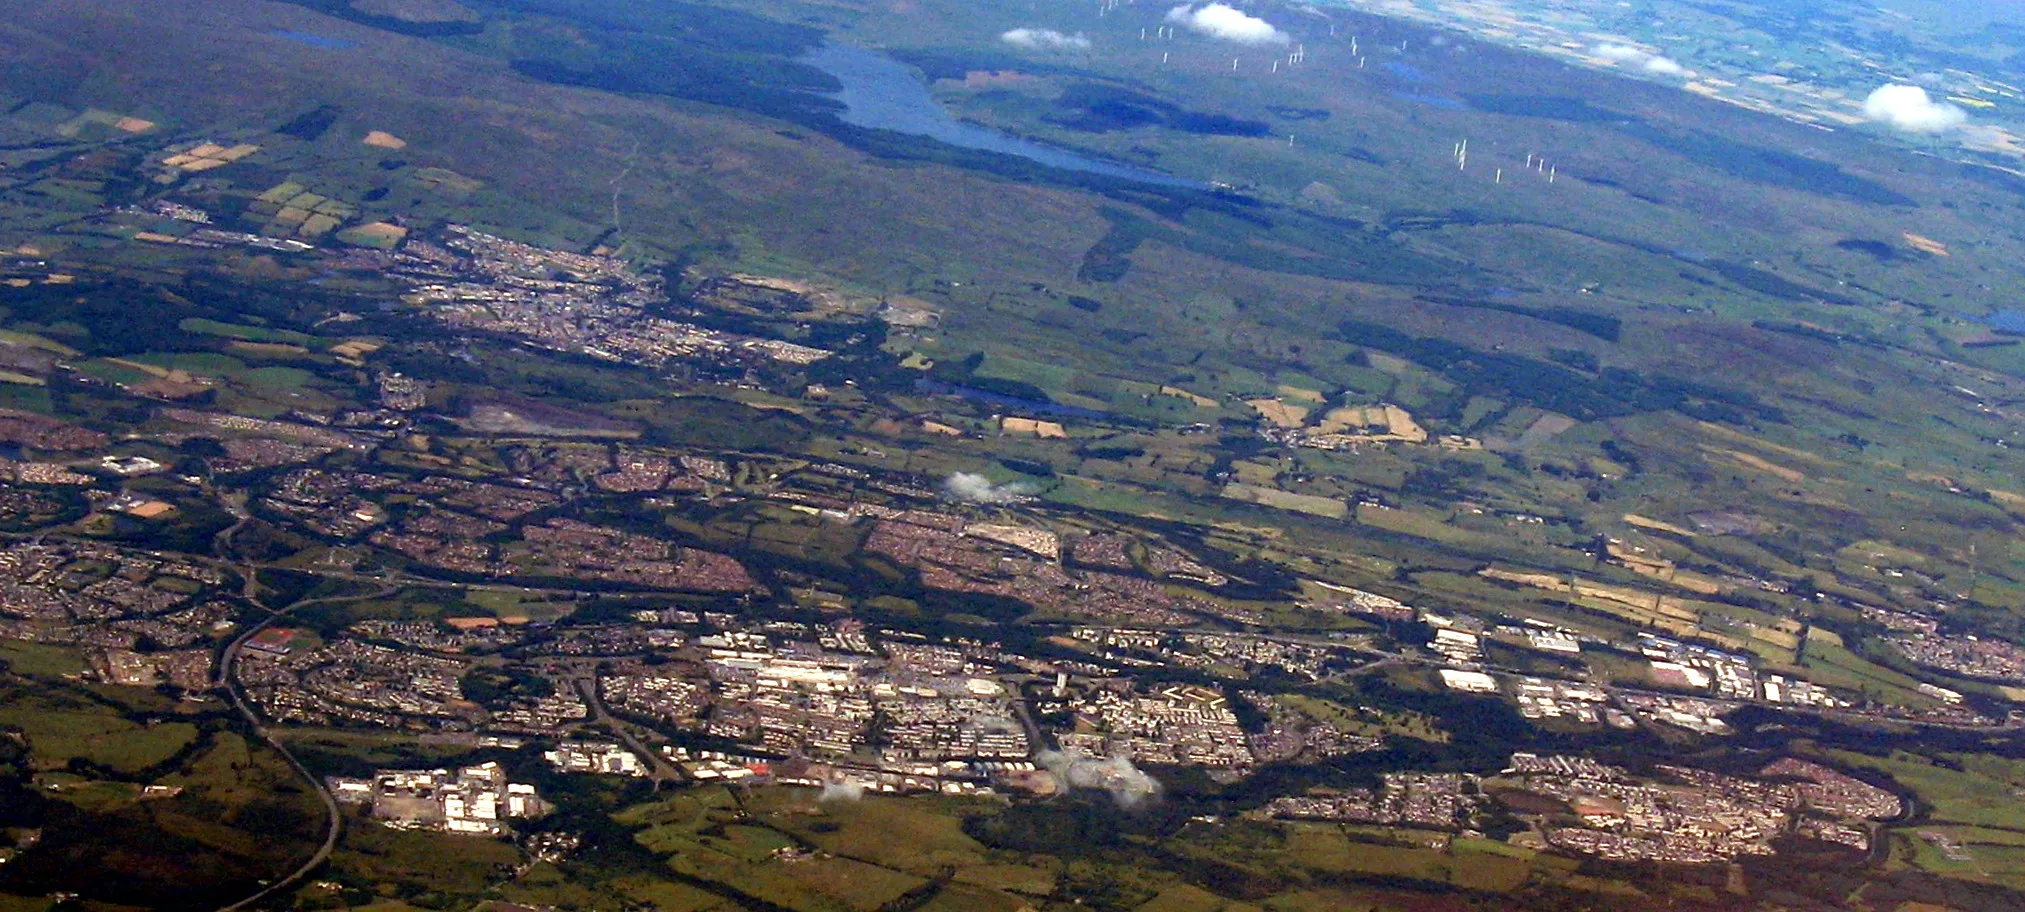 Photo showing: Looking northwest from over North Lanarkshire. The main built-up area across the lower centre is Cumbernauld; beyond and a little left is Kilsyth and beyond that are the Kilsyth Hills and the Carron Valley Reservoir.